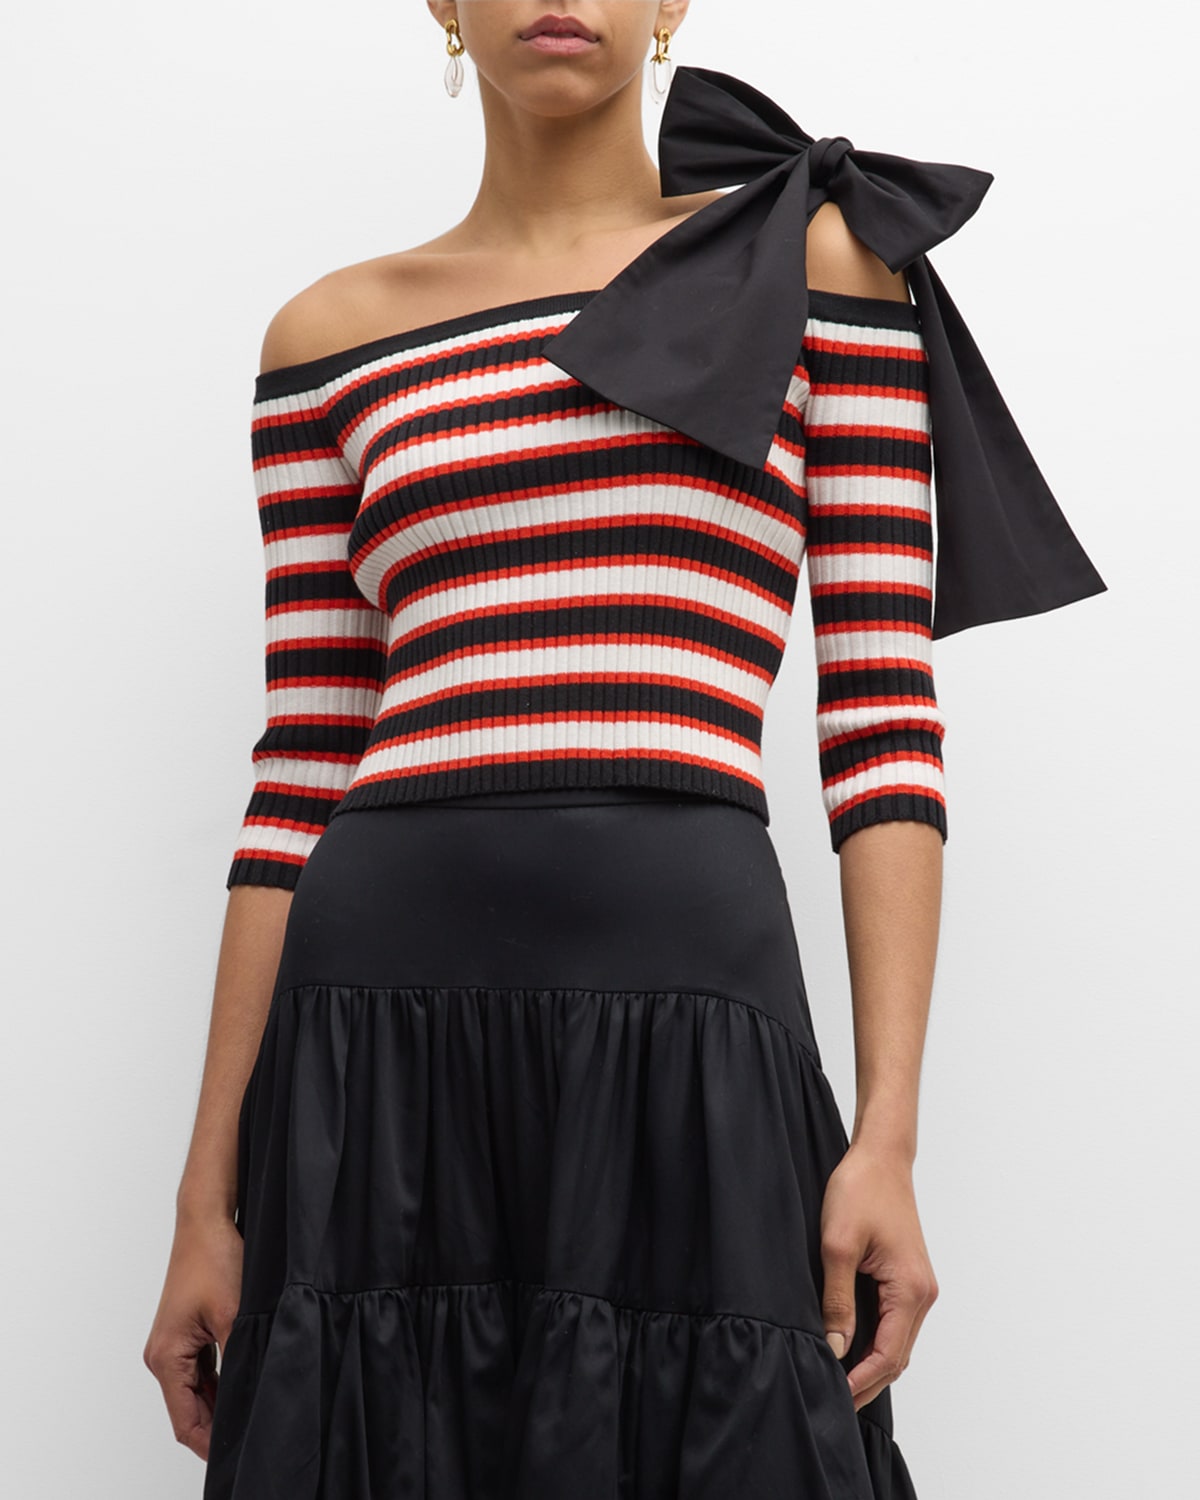 Carlo Bow Off-The-Shoulder Striped Rib Crop Top